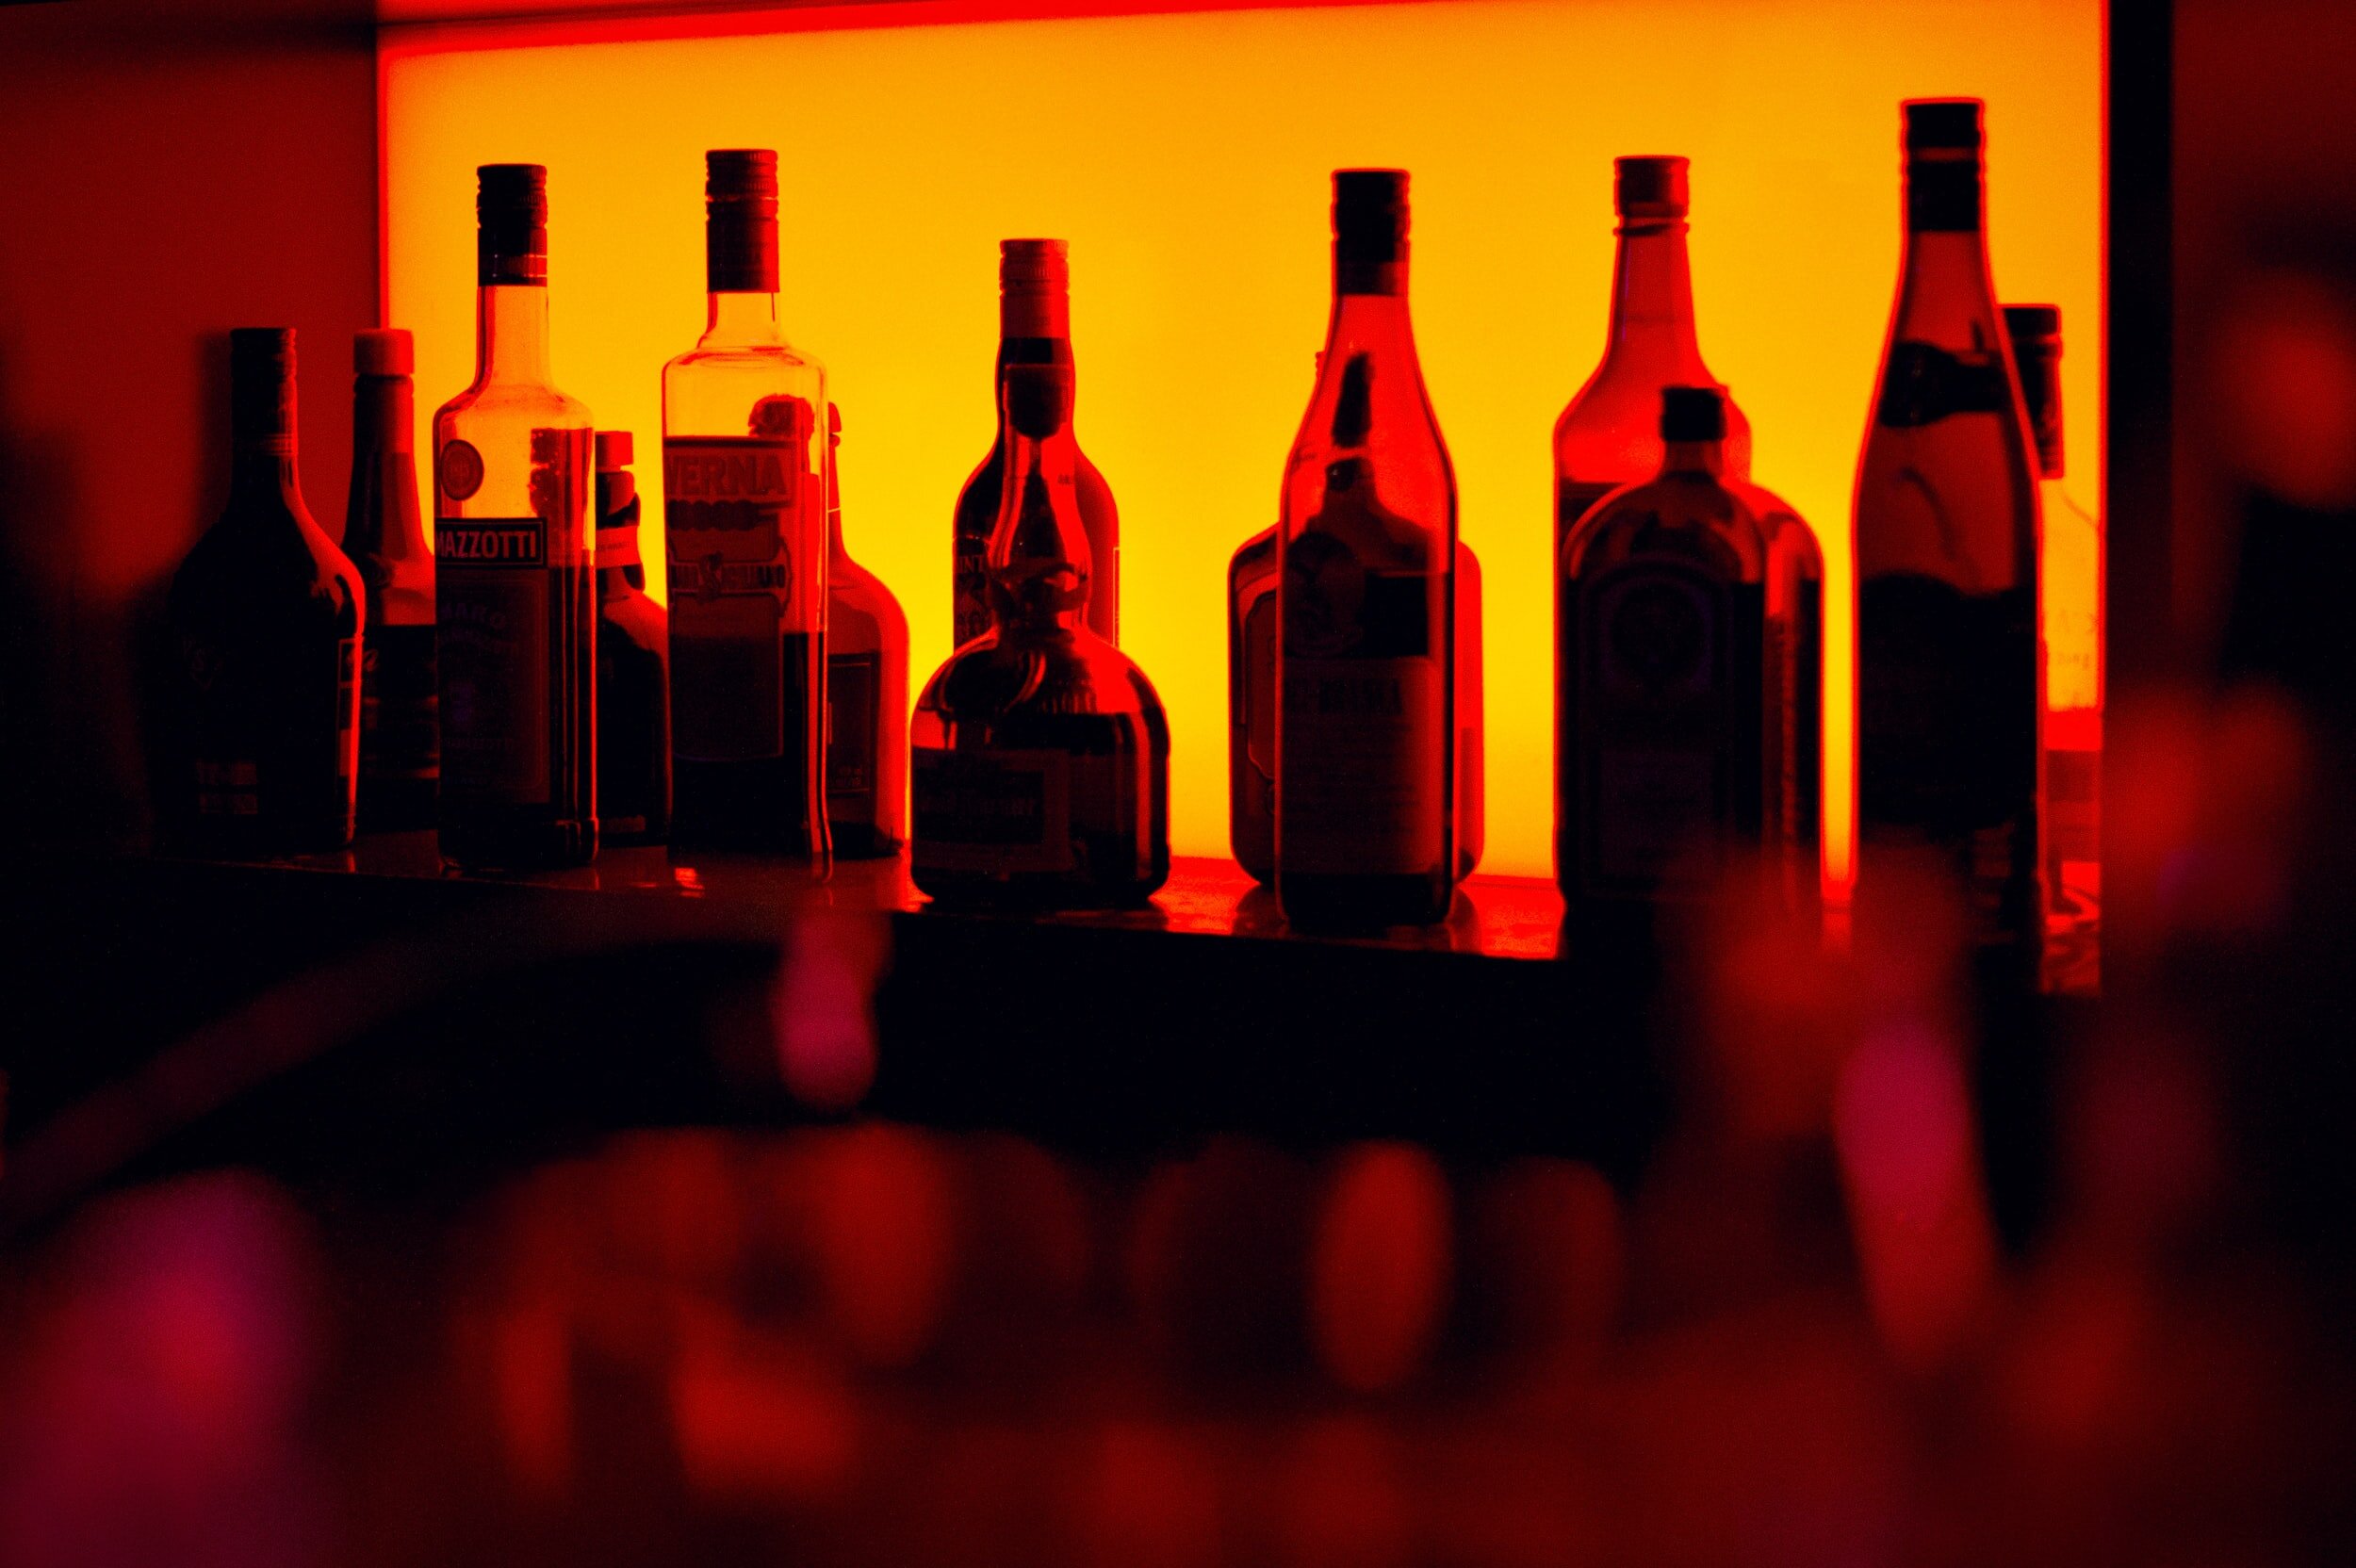 Laws allowing insurers to deny alcohol-related claims do not deter drinking, study suggests